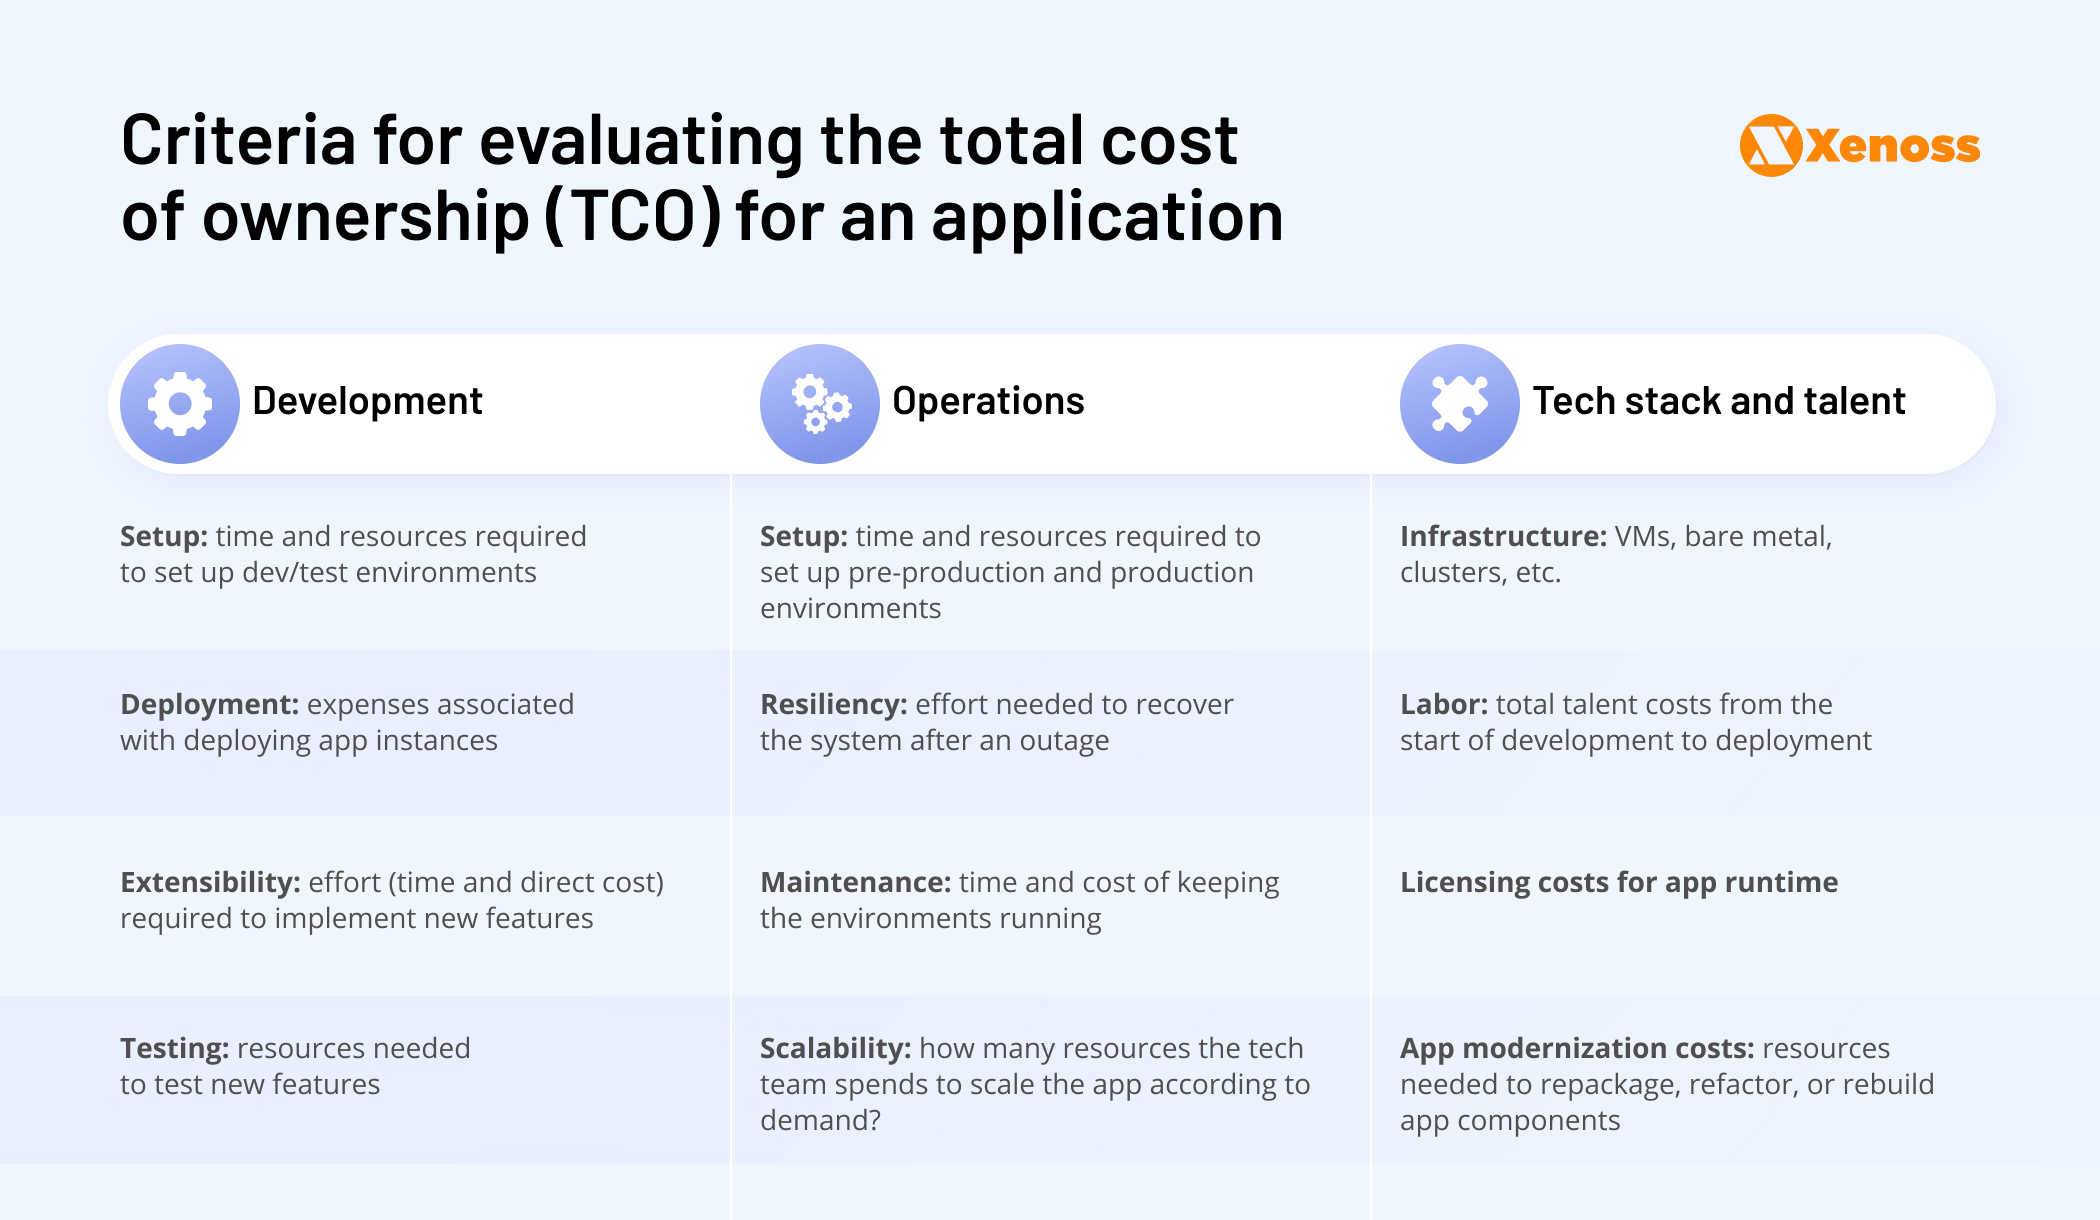 Criteria for assessing the TCO of AdTech applications